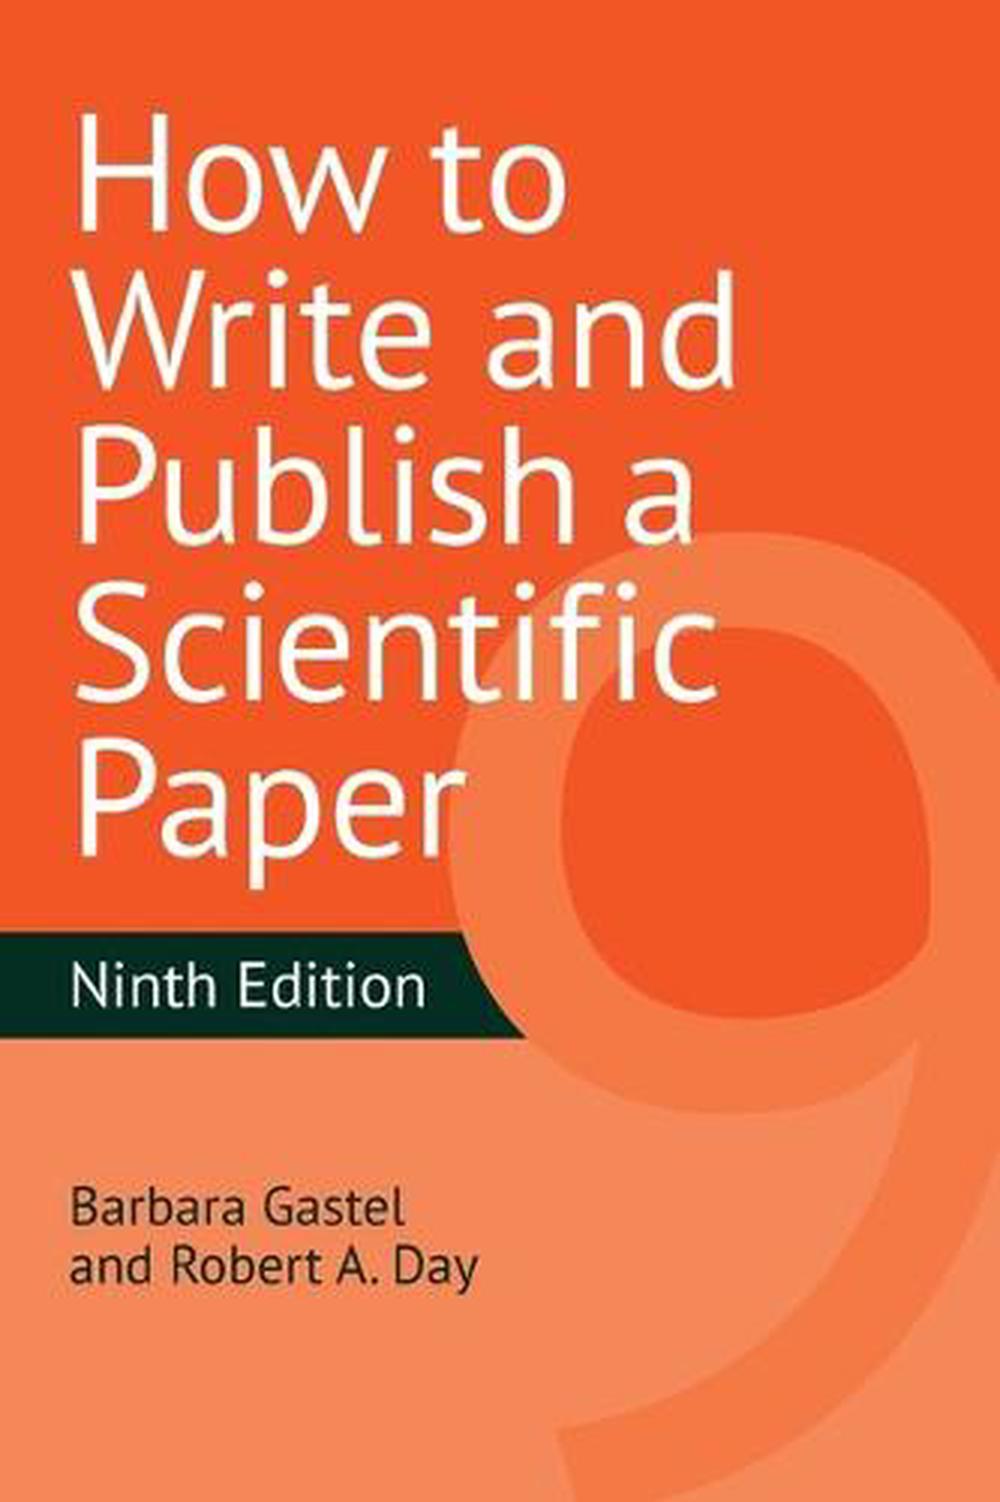 how to write and publish a scientific paper barbara gastel